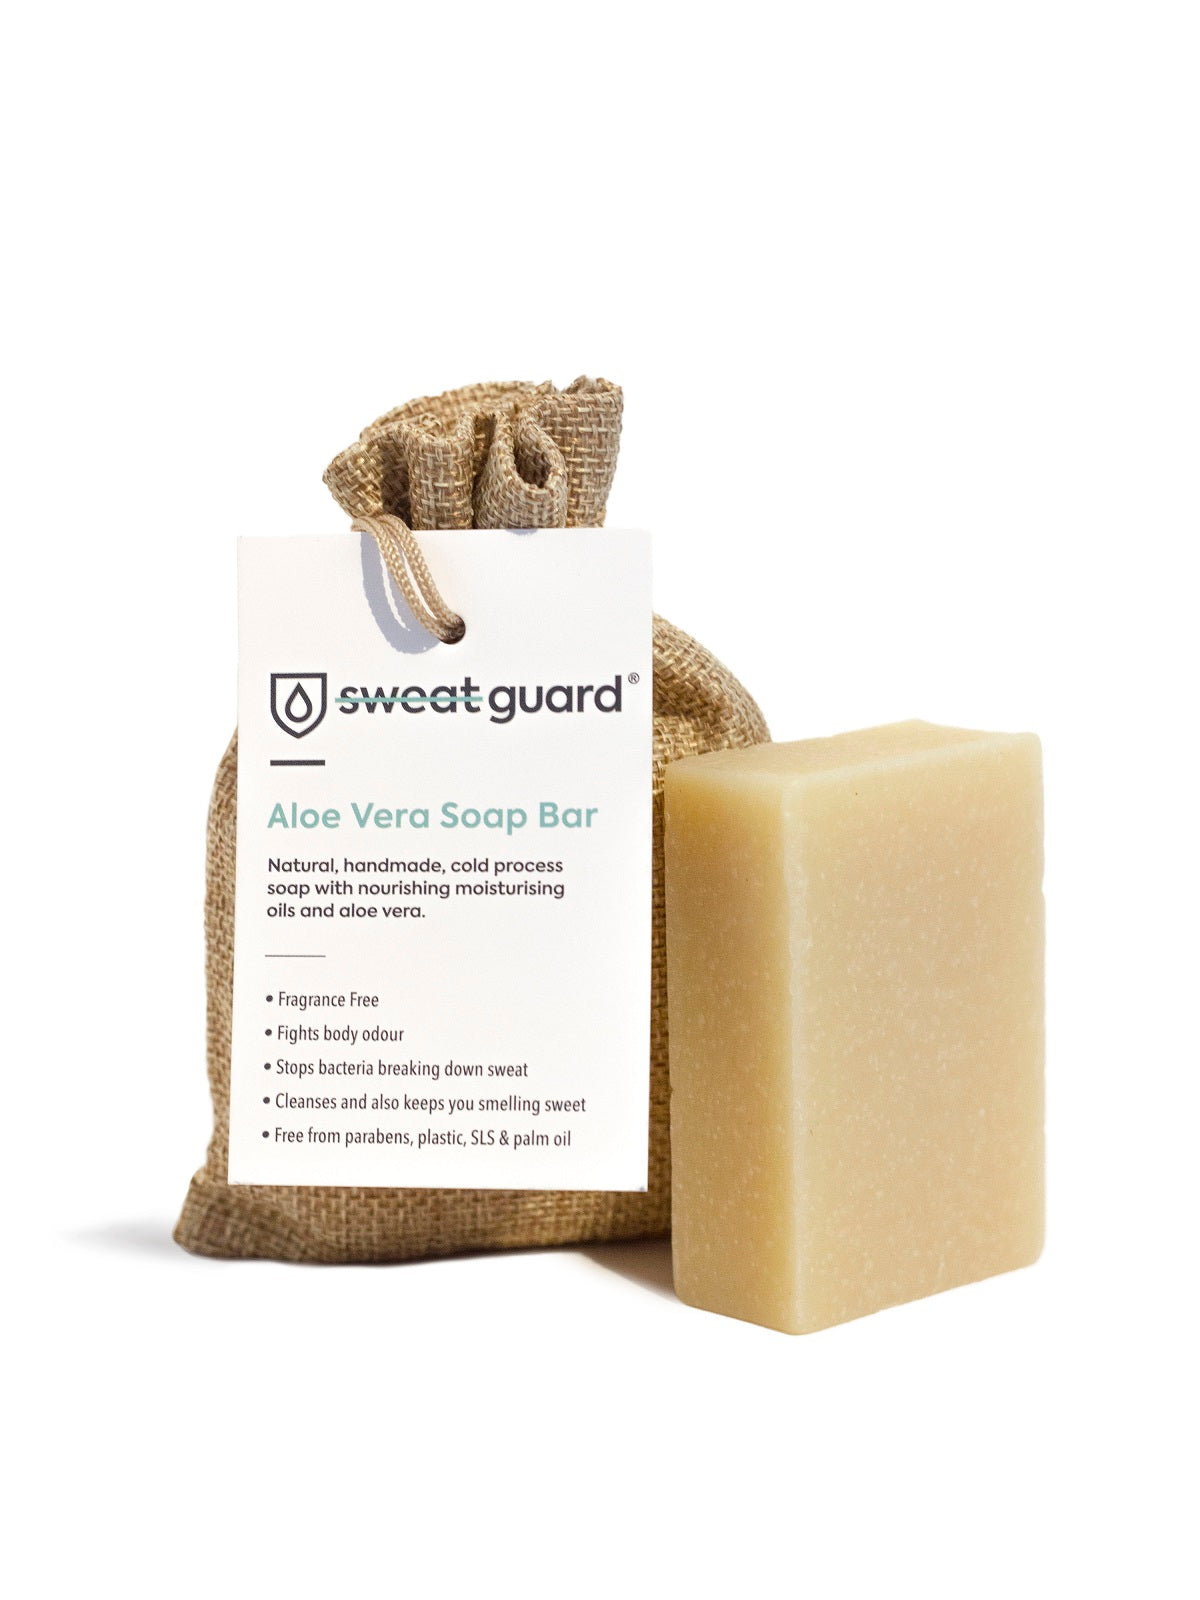 Forget soap on a rope try our natural soap in a jute bag. Great for fighting body odour.